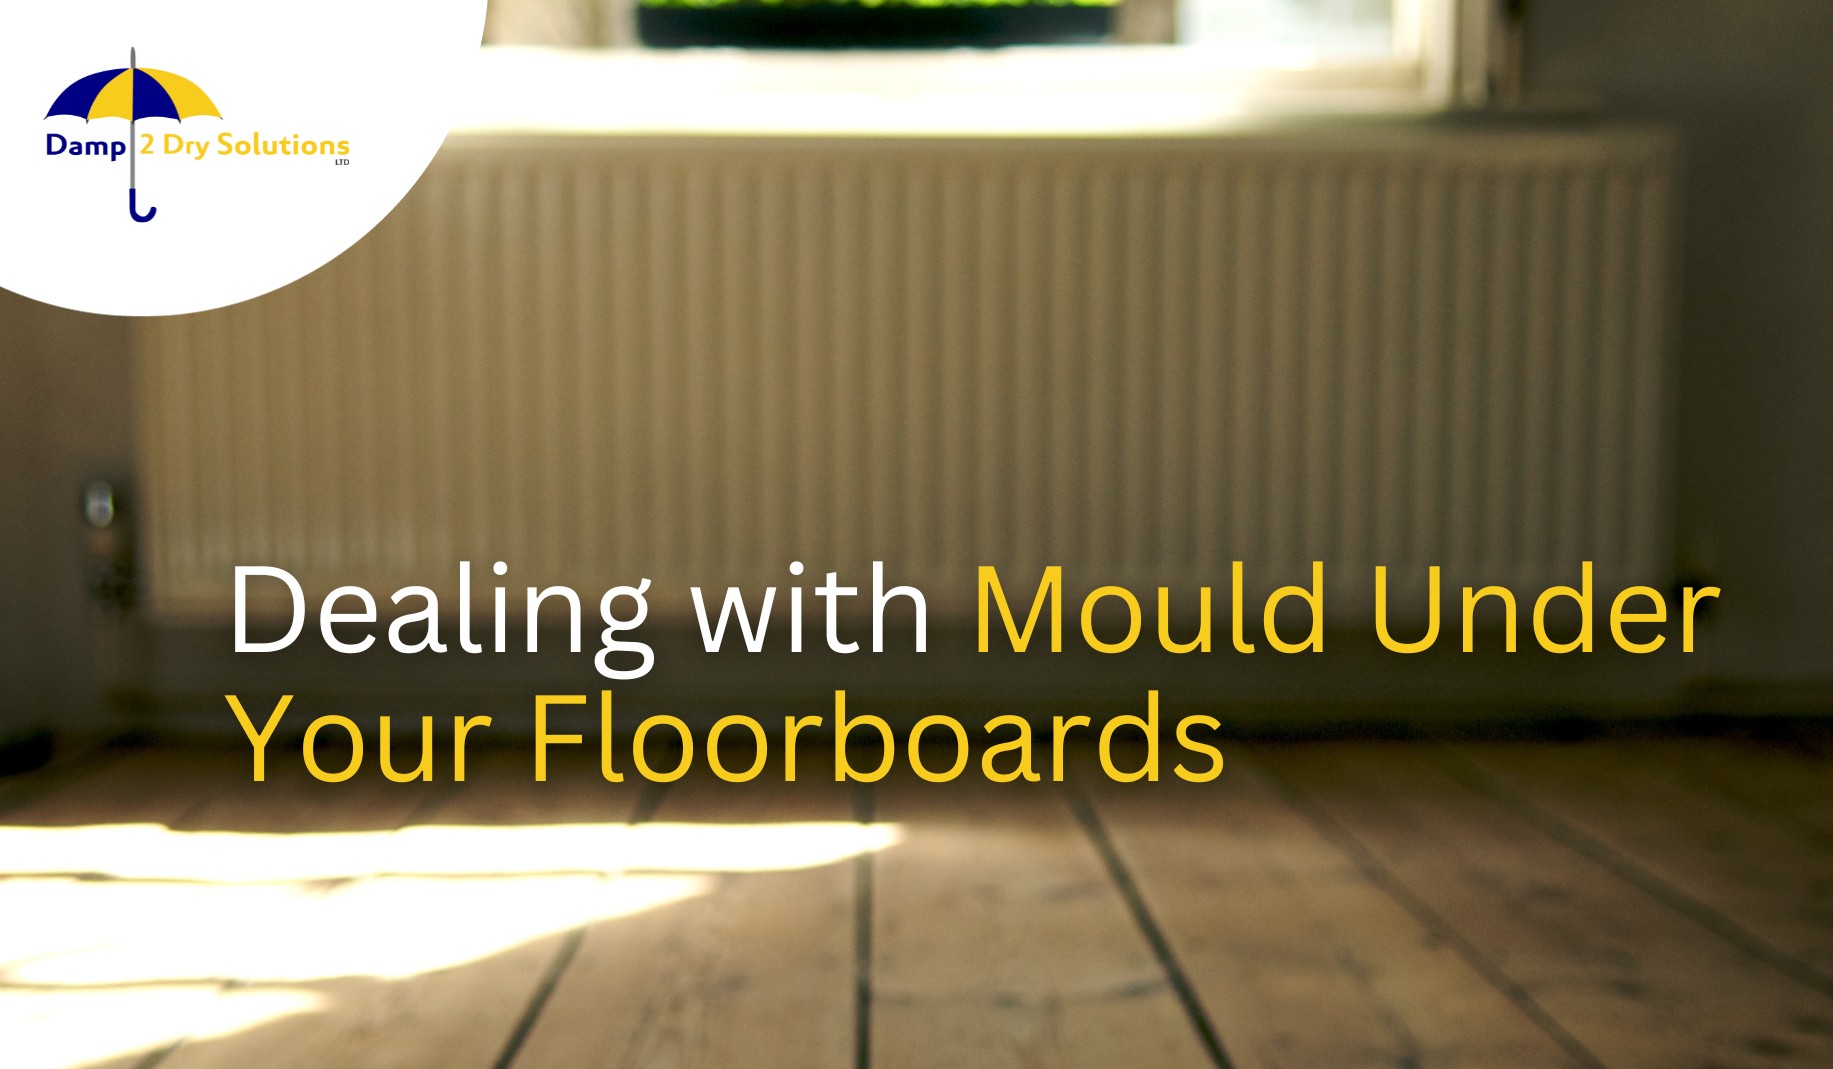 mould under your floorboards